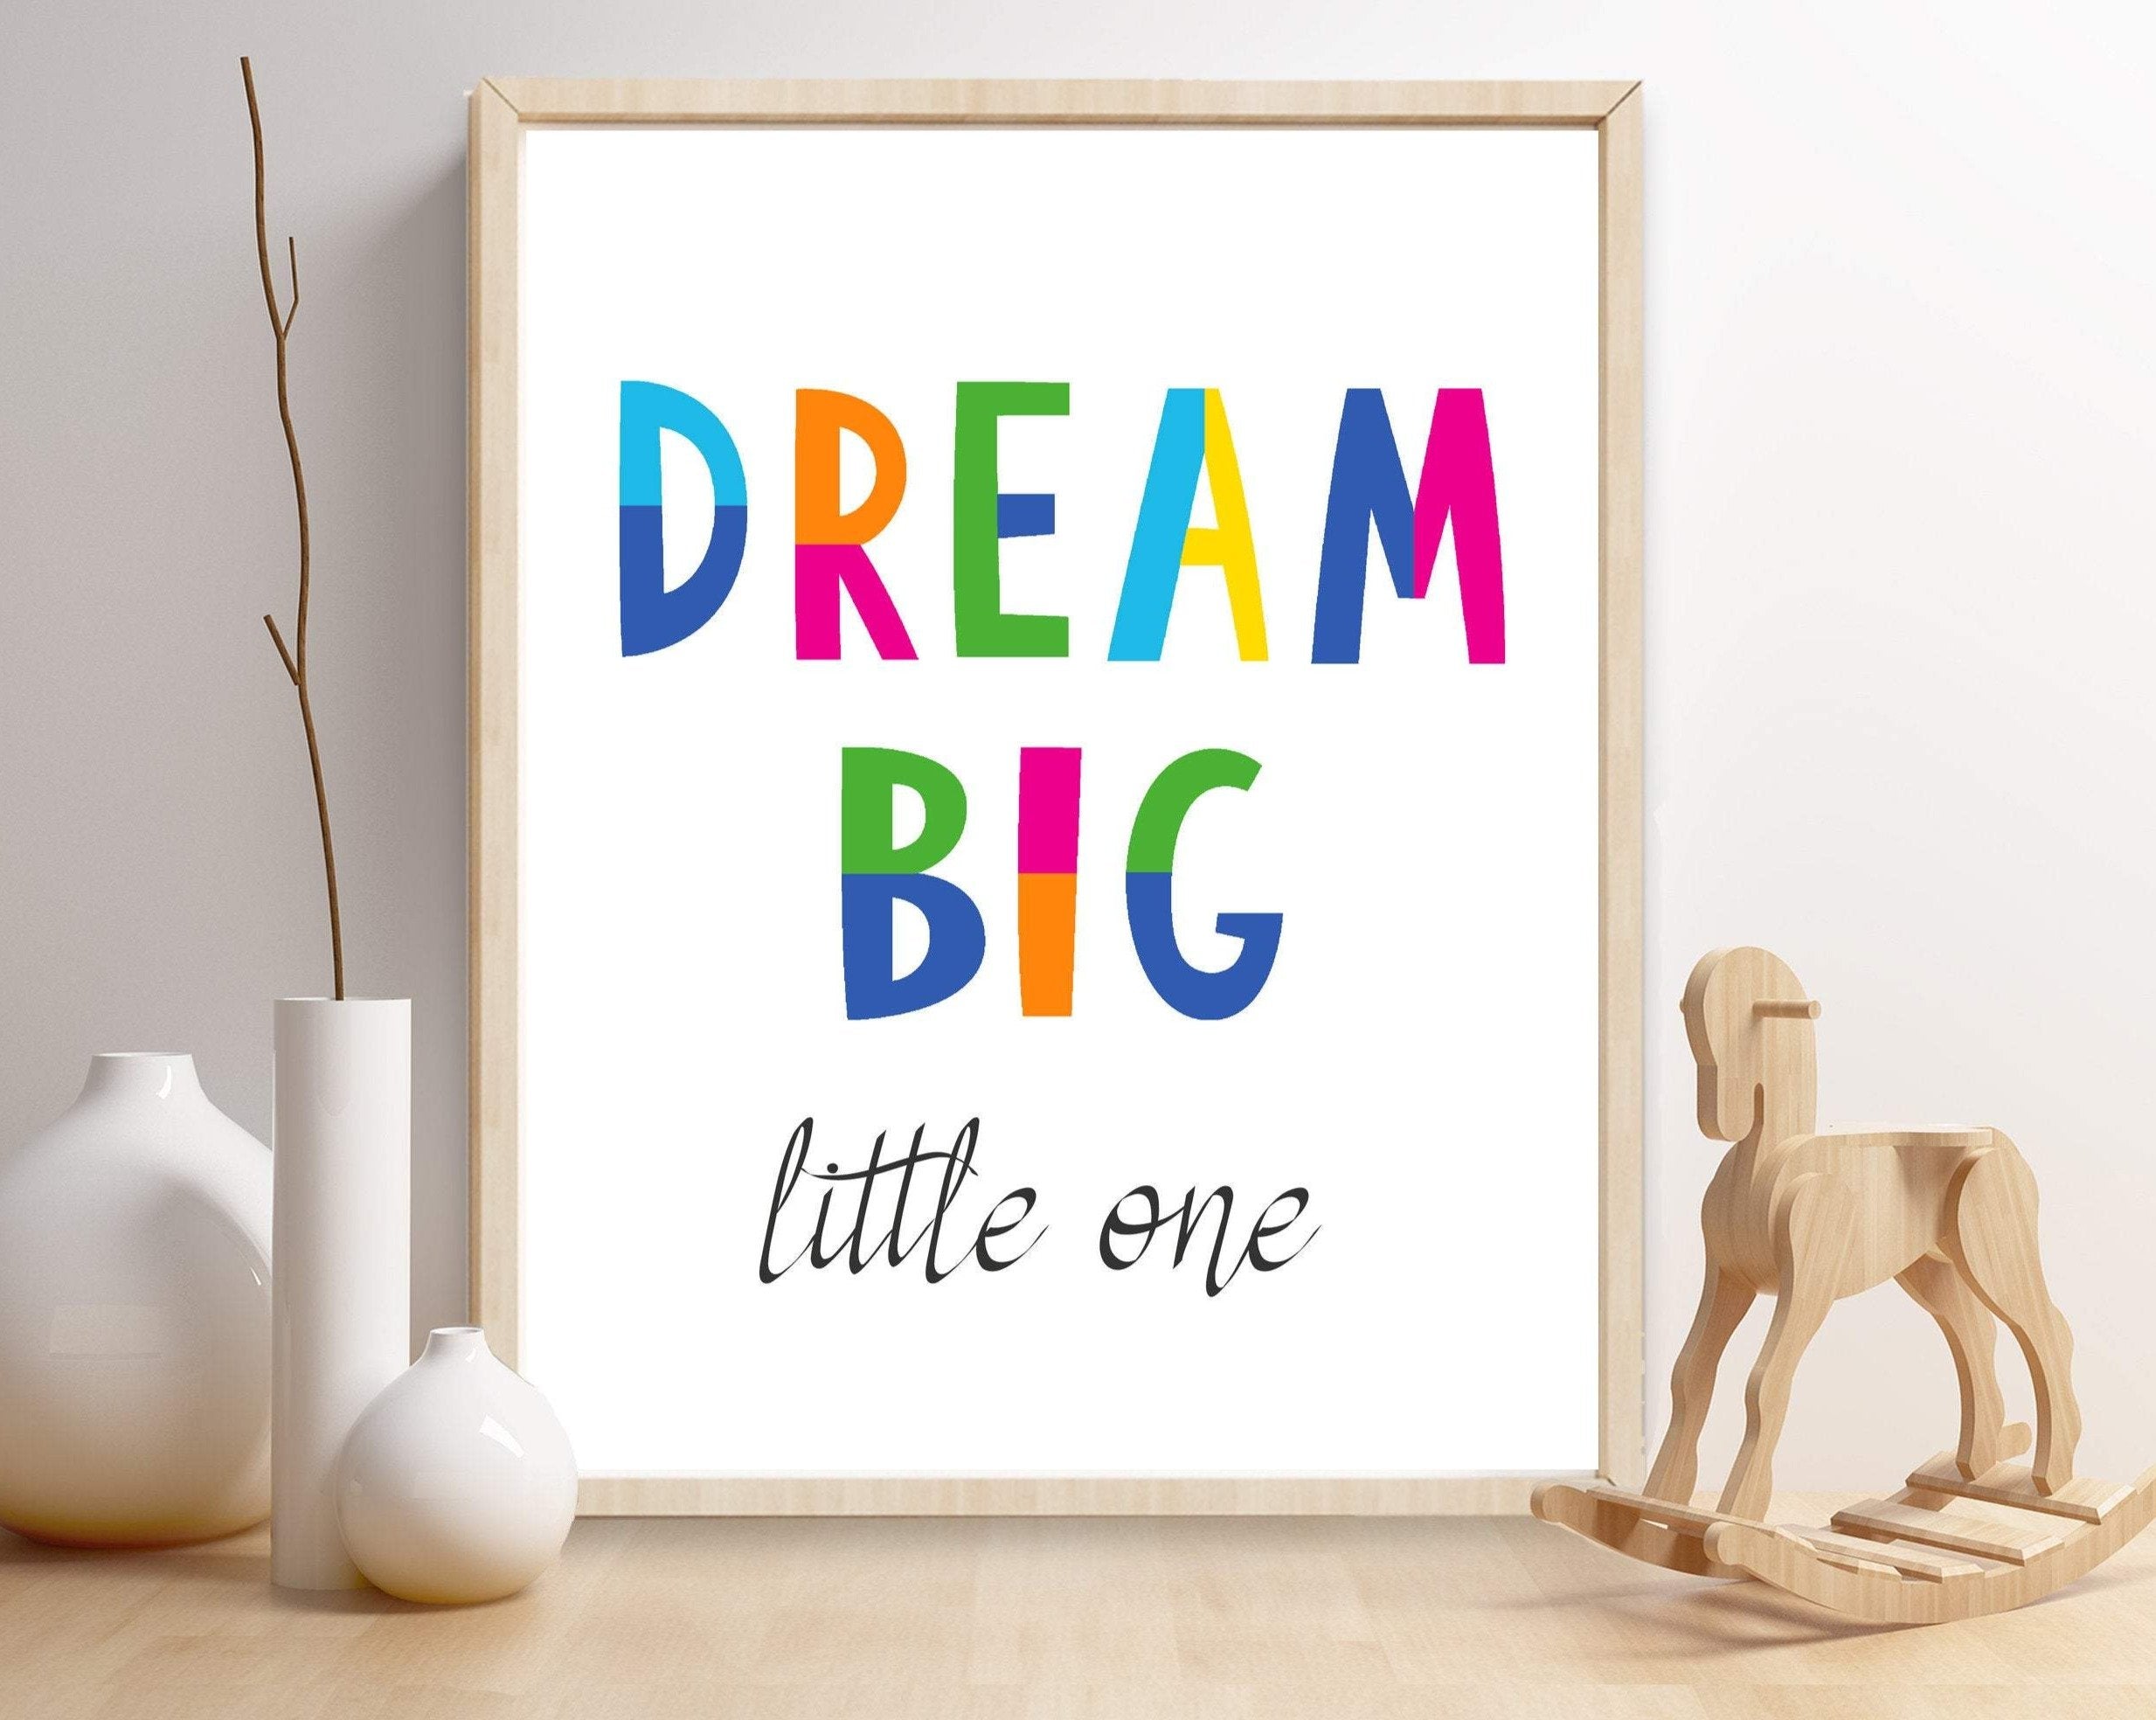 2x3 Dream Big Little One Quote, Featured in bright colors, Girls & Boys art, printable kids wall art -25 sizes Include - Instant Download -H1362 nursery art print baby nursery bedroom decor